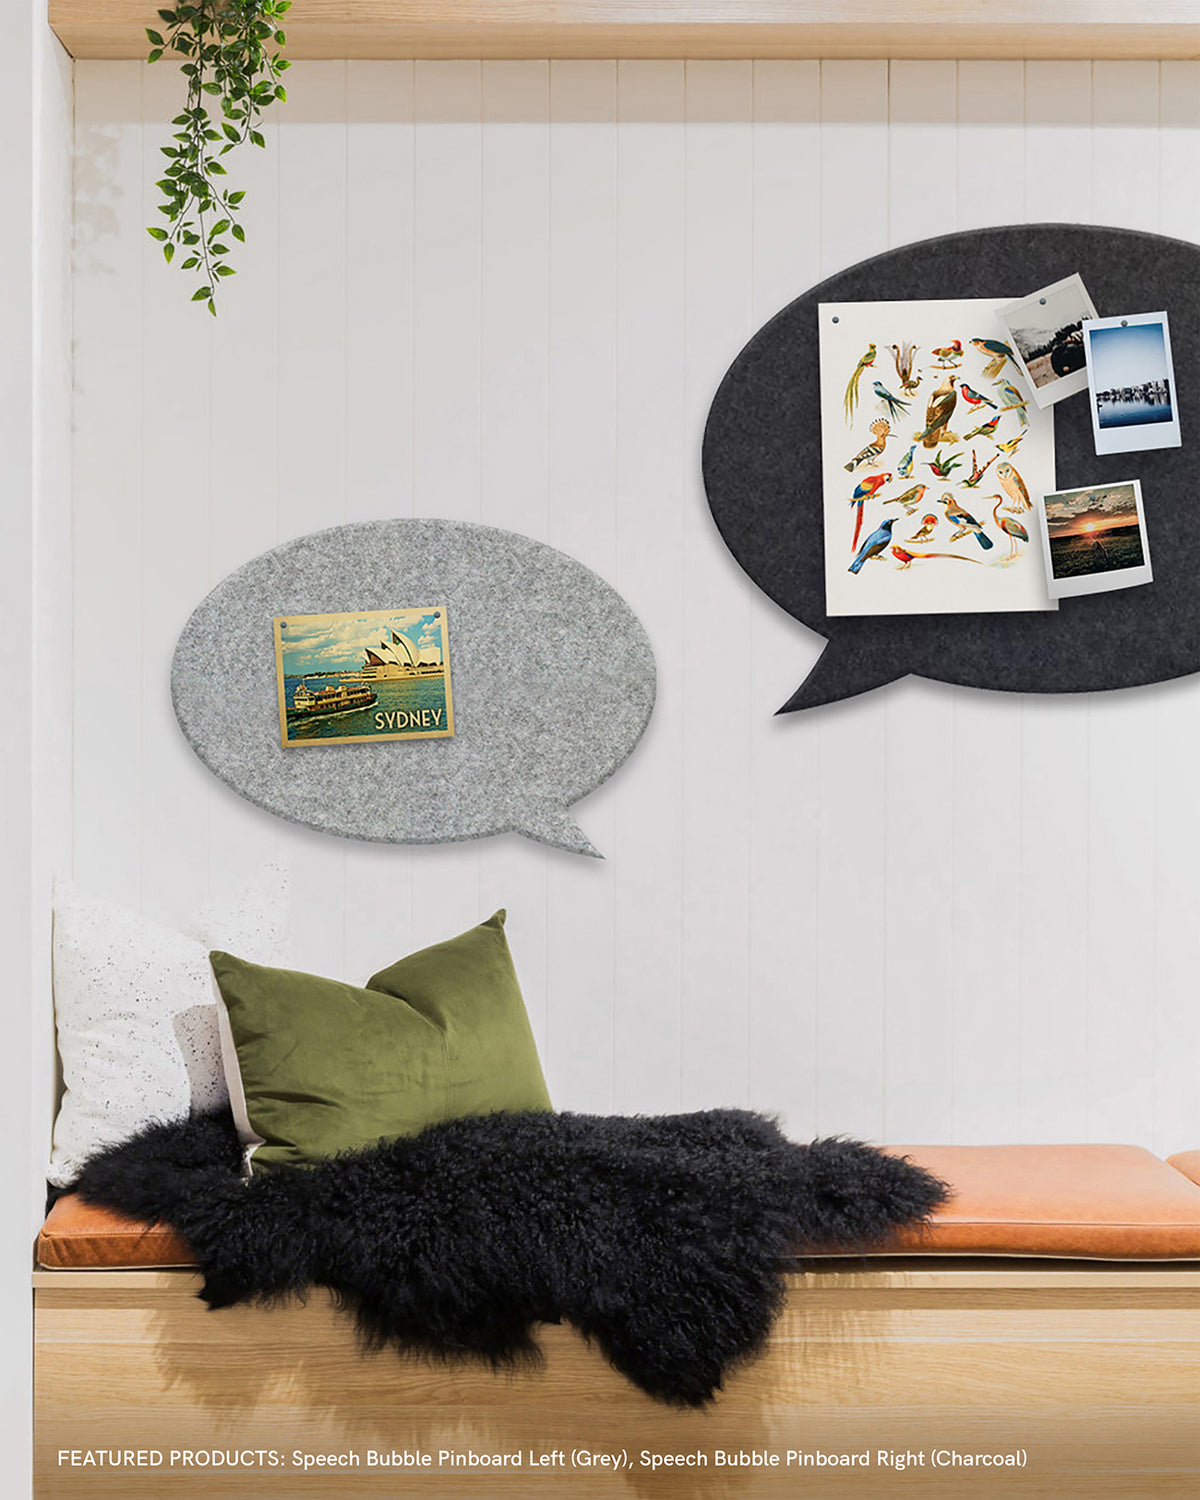 With a beautiful felt-like appearance, our Speech Bubble Pinboards are amazing to touch as well as visually appealing in all living spaces. They come with easy peel-and-stick tabs for your wall, making them ready for pinning straight away. Whether it’s over a desk or simply running down a wall, these pinboards are so versatile for little kids, big kids, and adults alike!